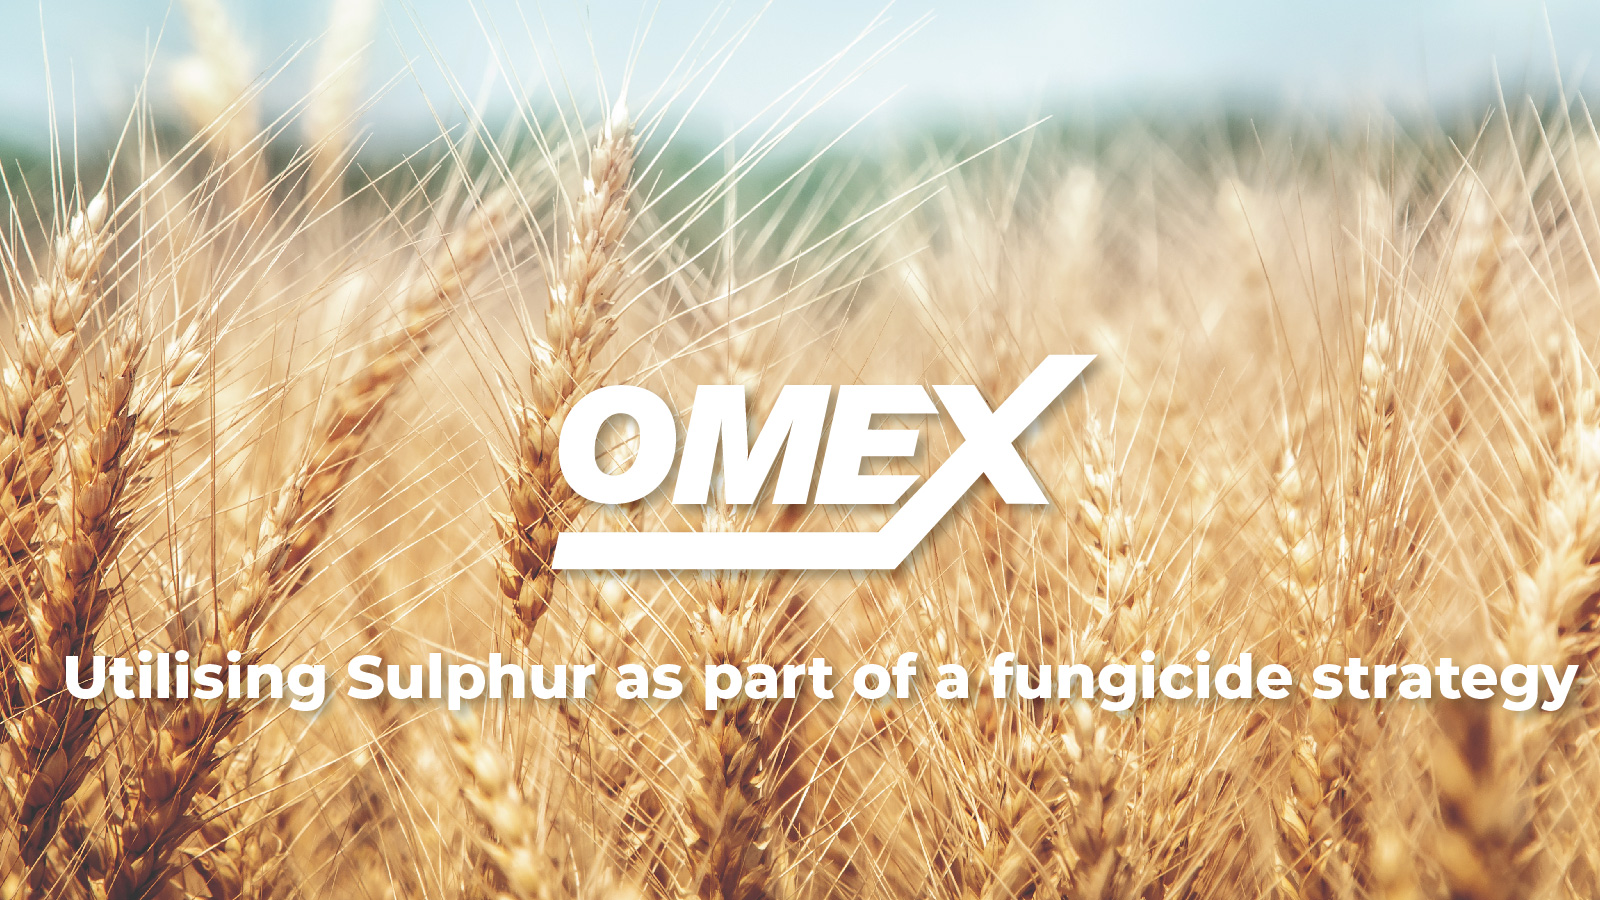 Utilising Sulphur as part of a fungicide strategy